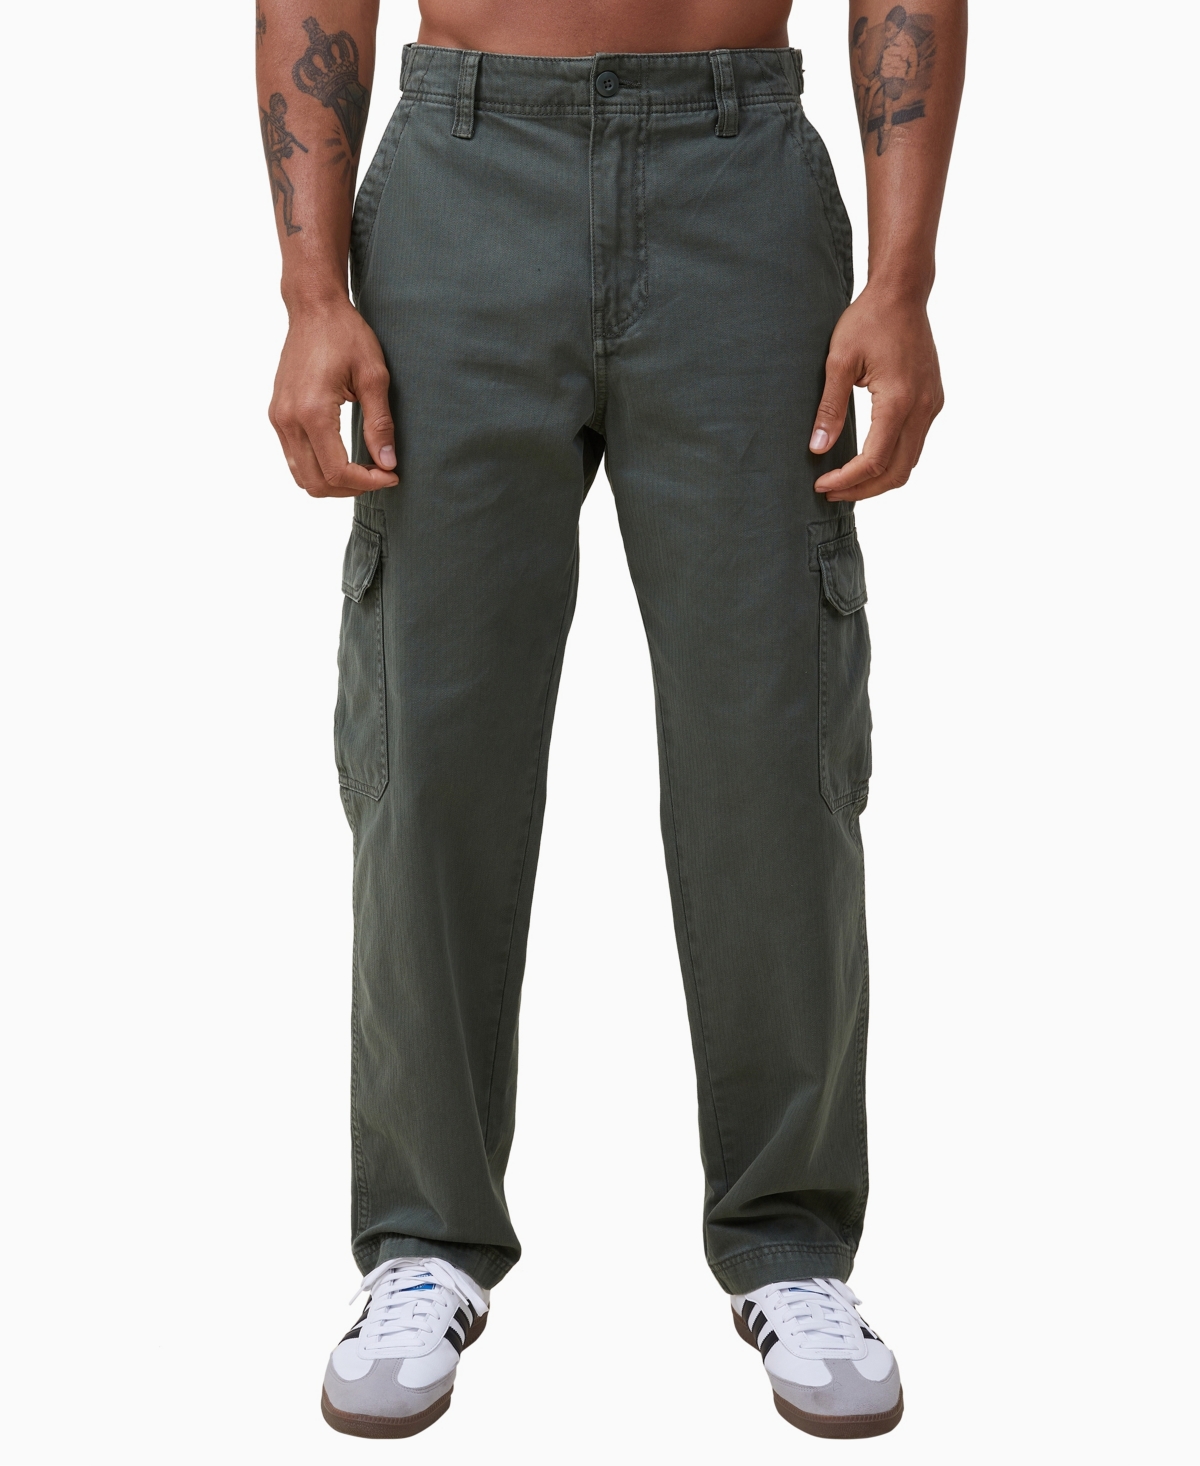 Cotton On Men's Tactical Cargo Pants In Cargo Vintage Army Green